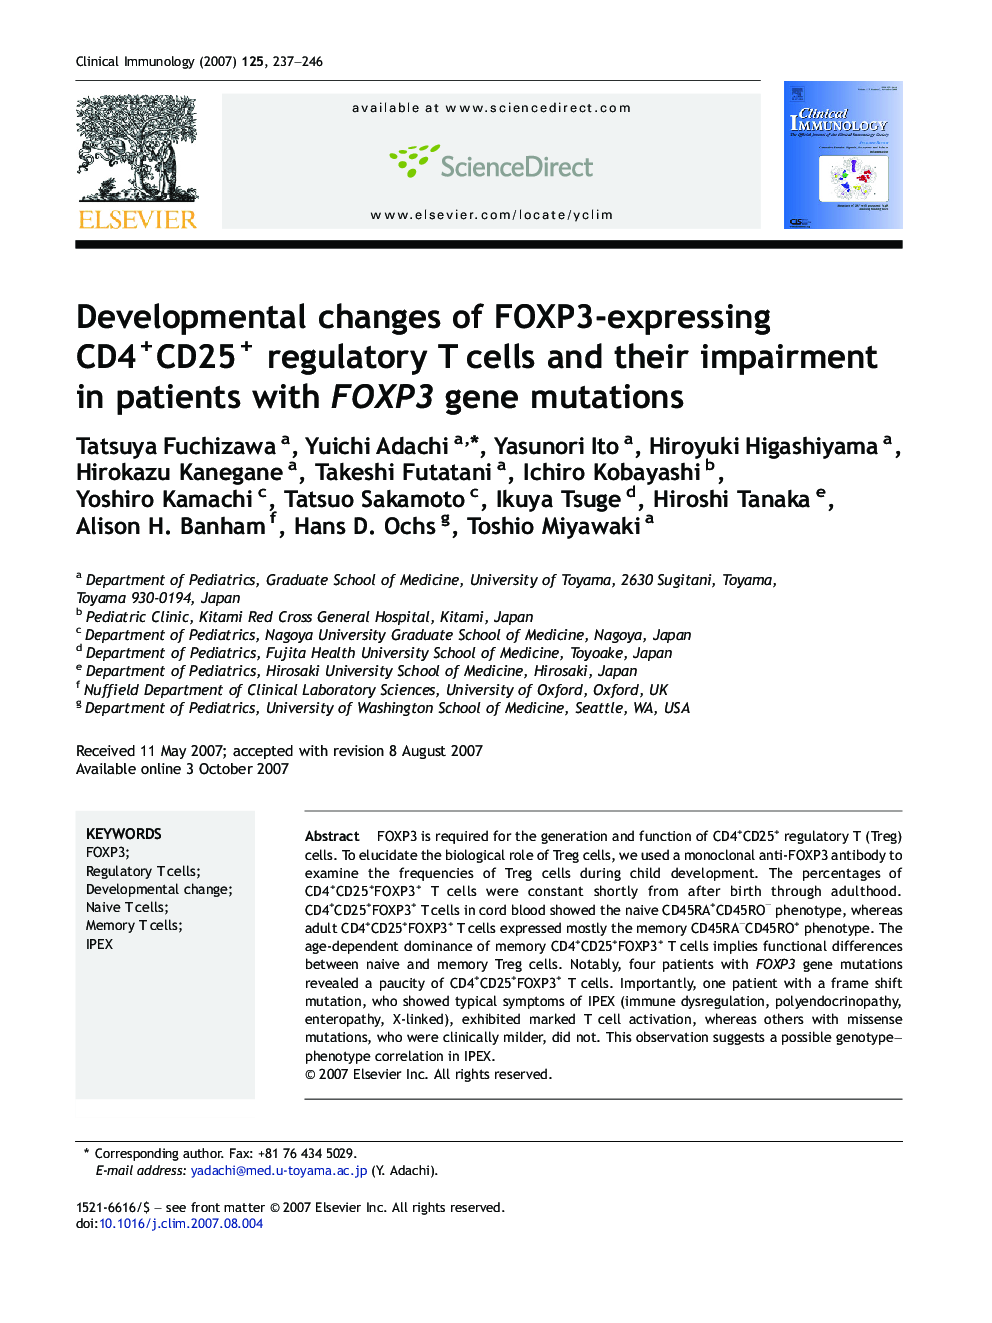 Developmental changes of FOXP3-expressing CD4+CD25+ regulatory T cells and their impairment in patients with FOXP3 gene mutations